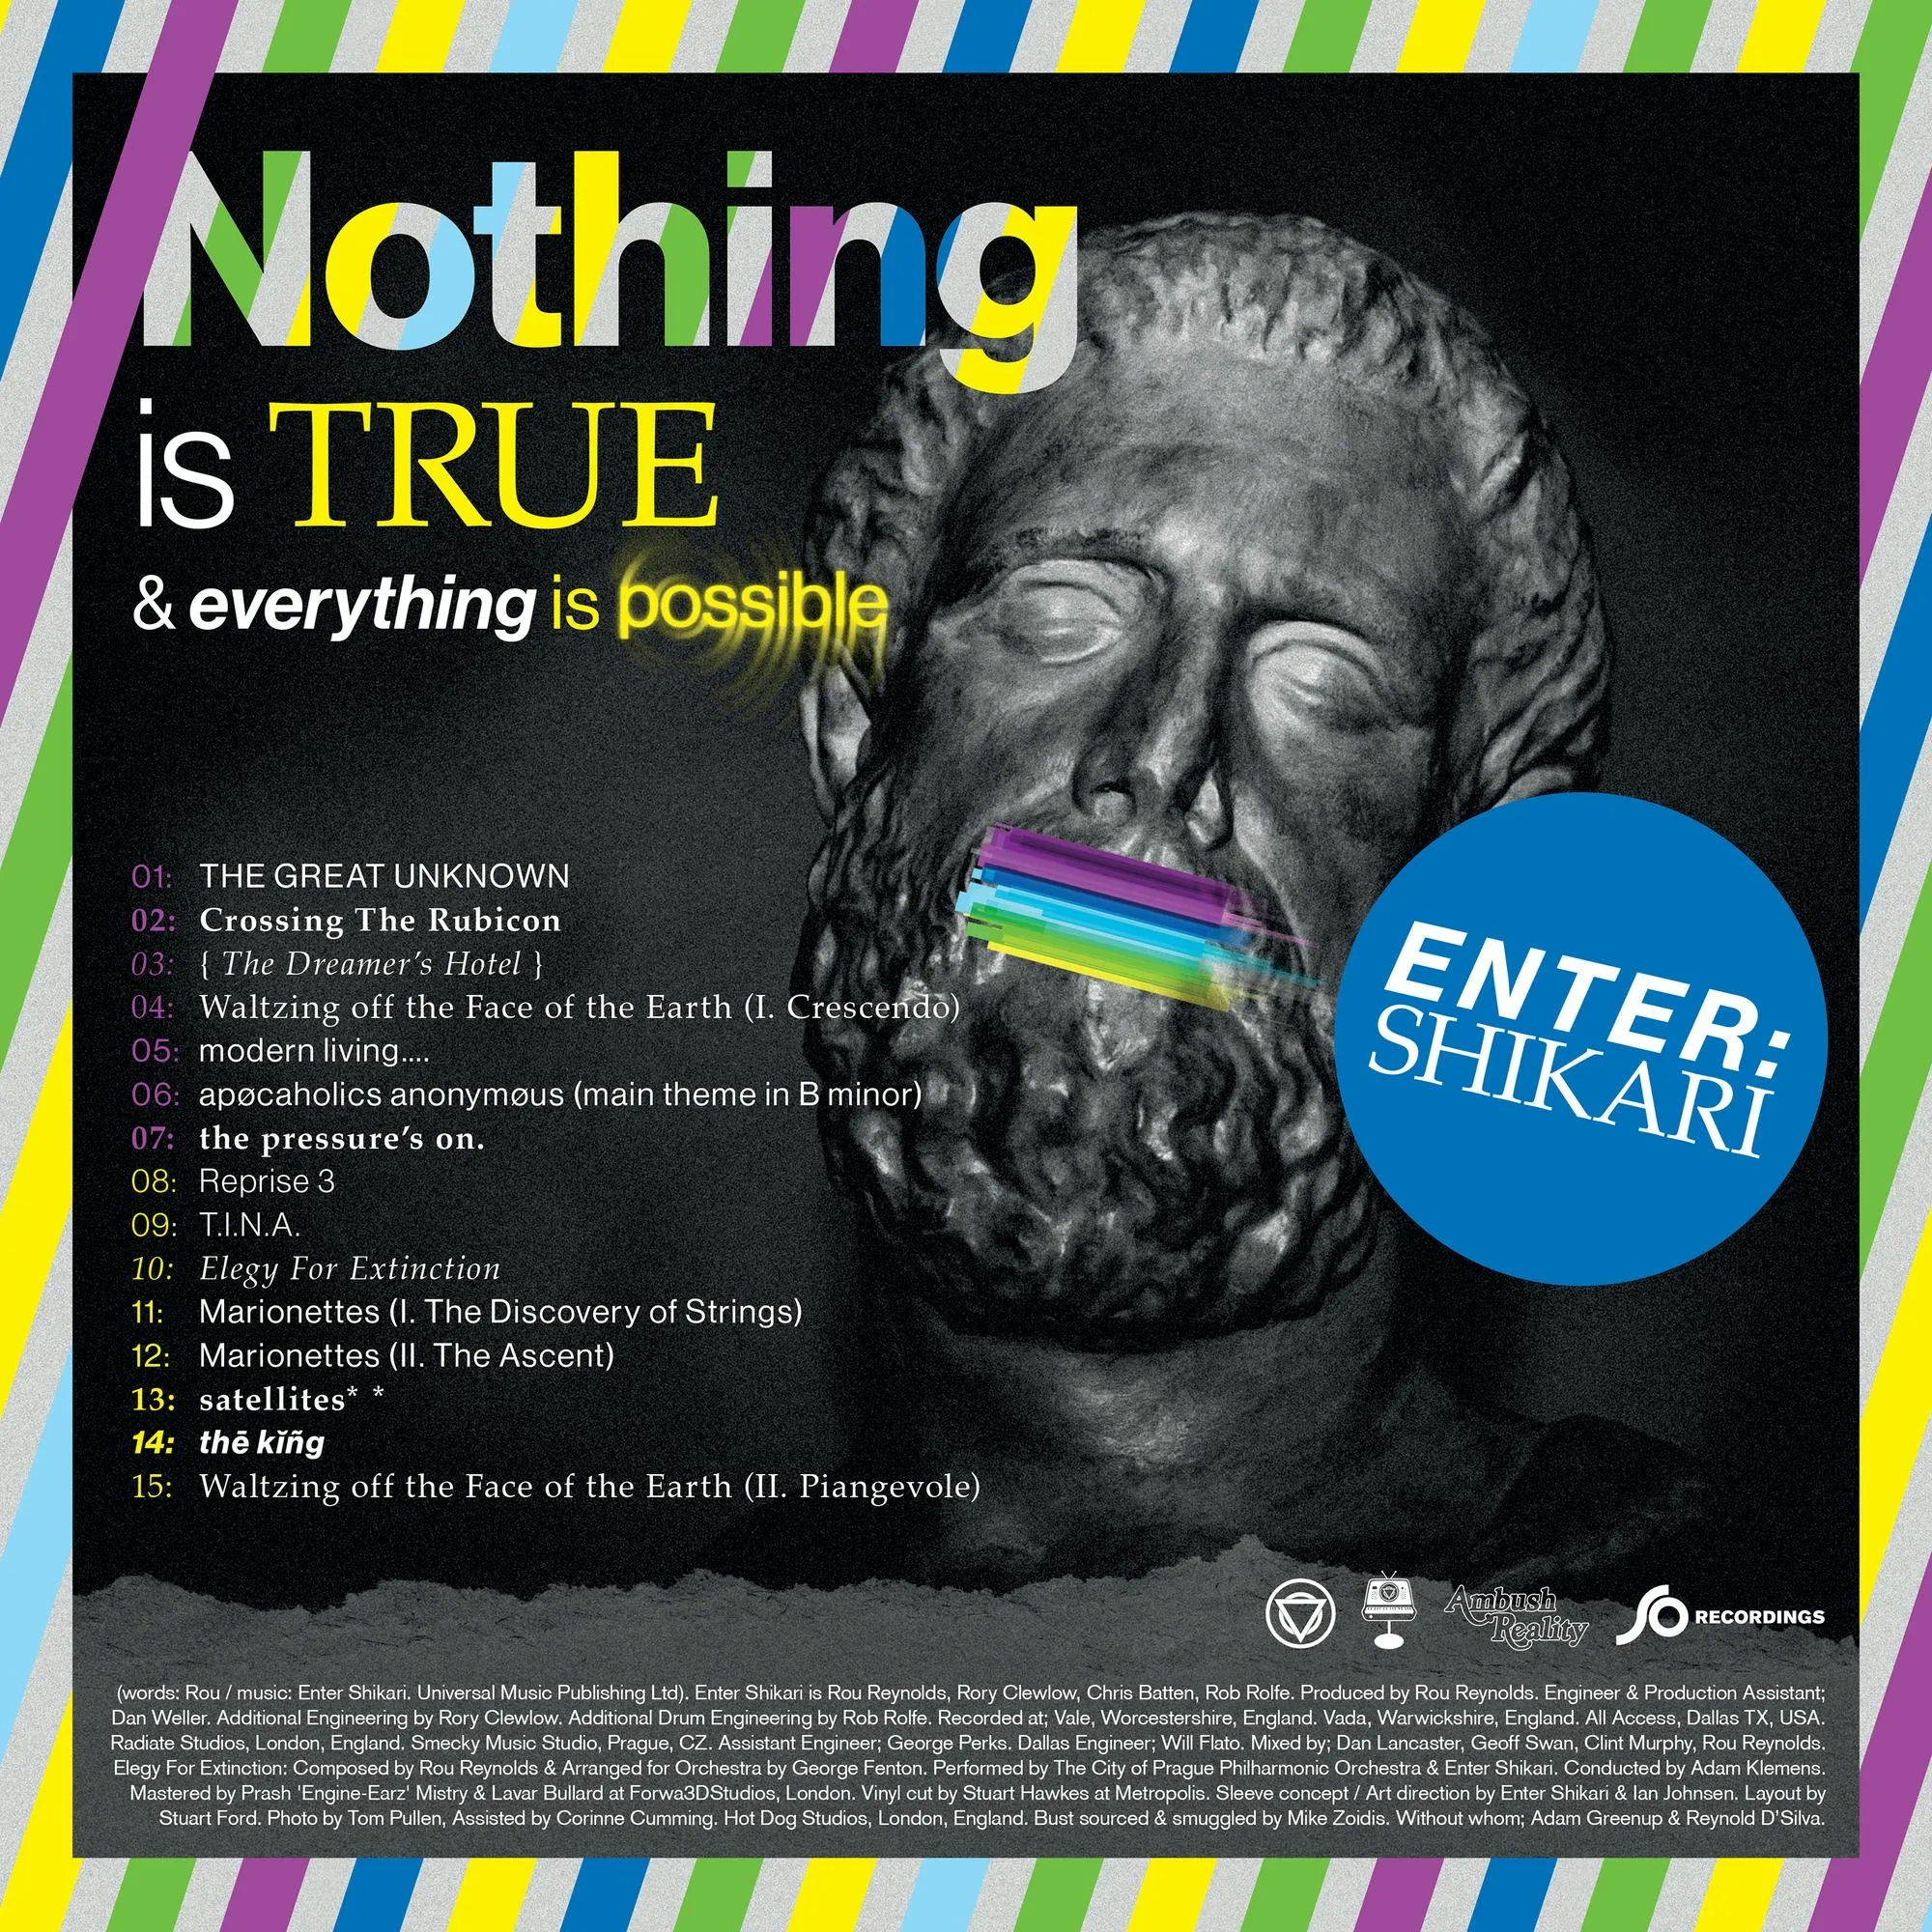 Album artwork for Nothing Is True and Everything Is Possible by Enter Shikari